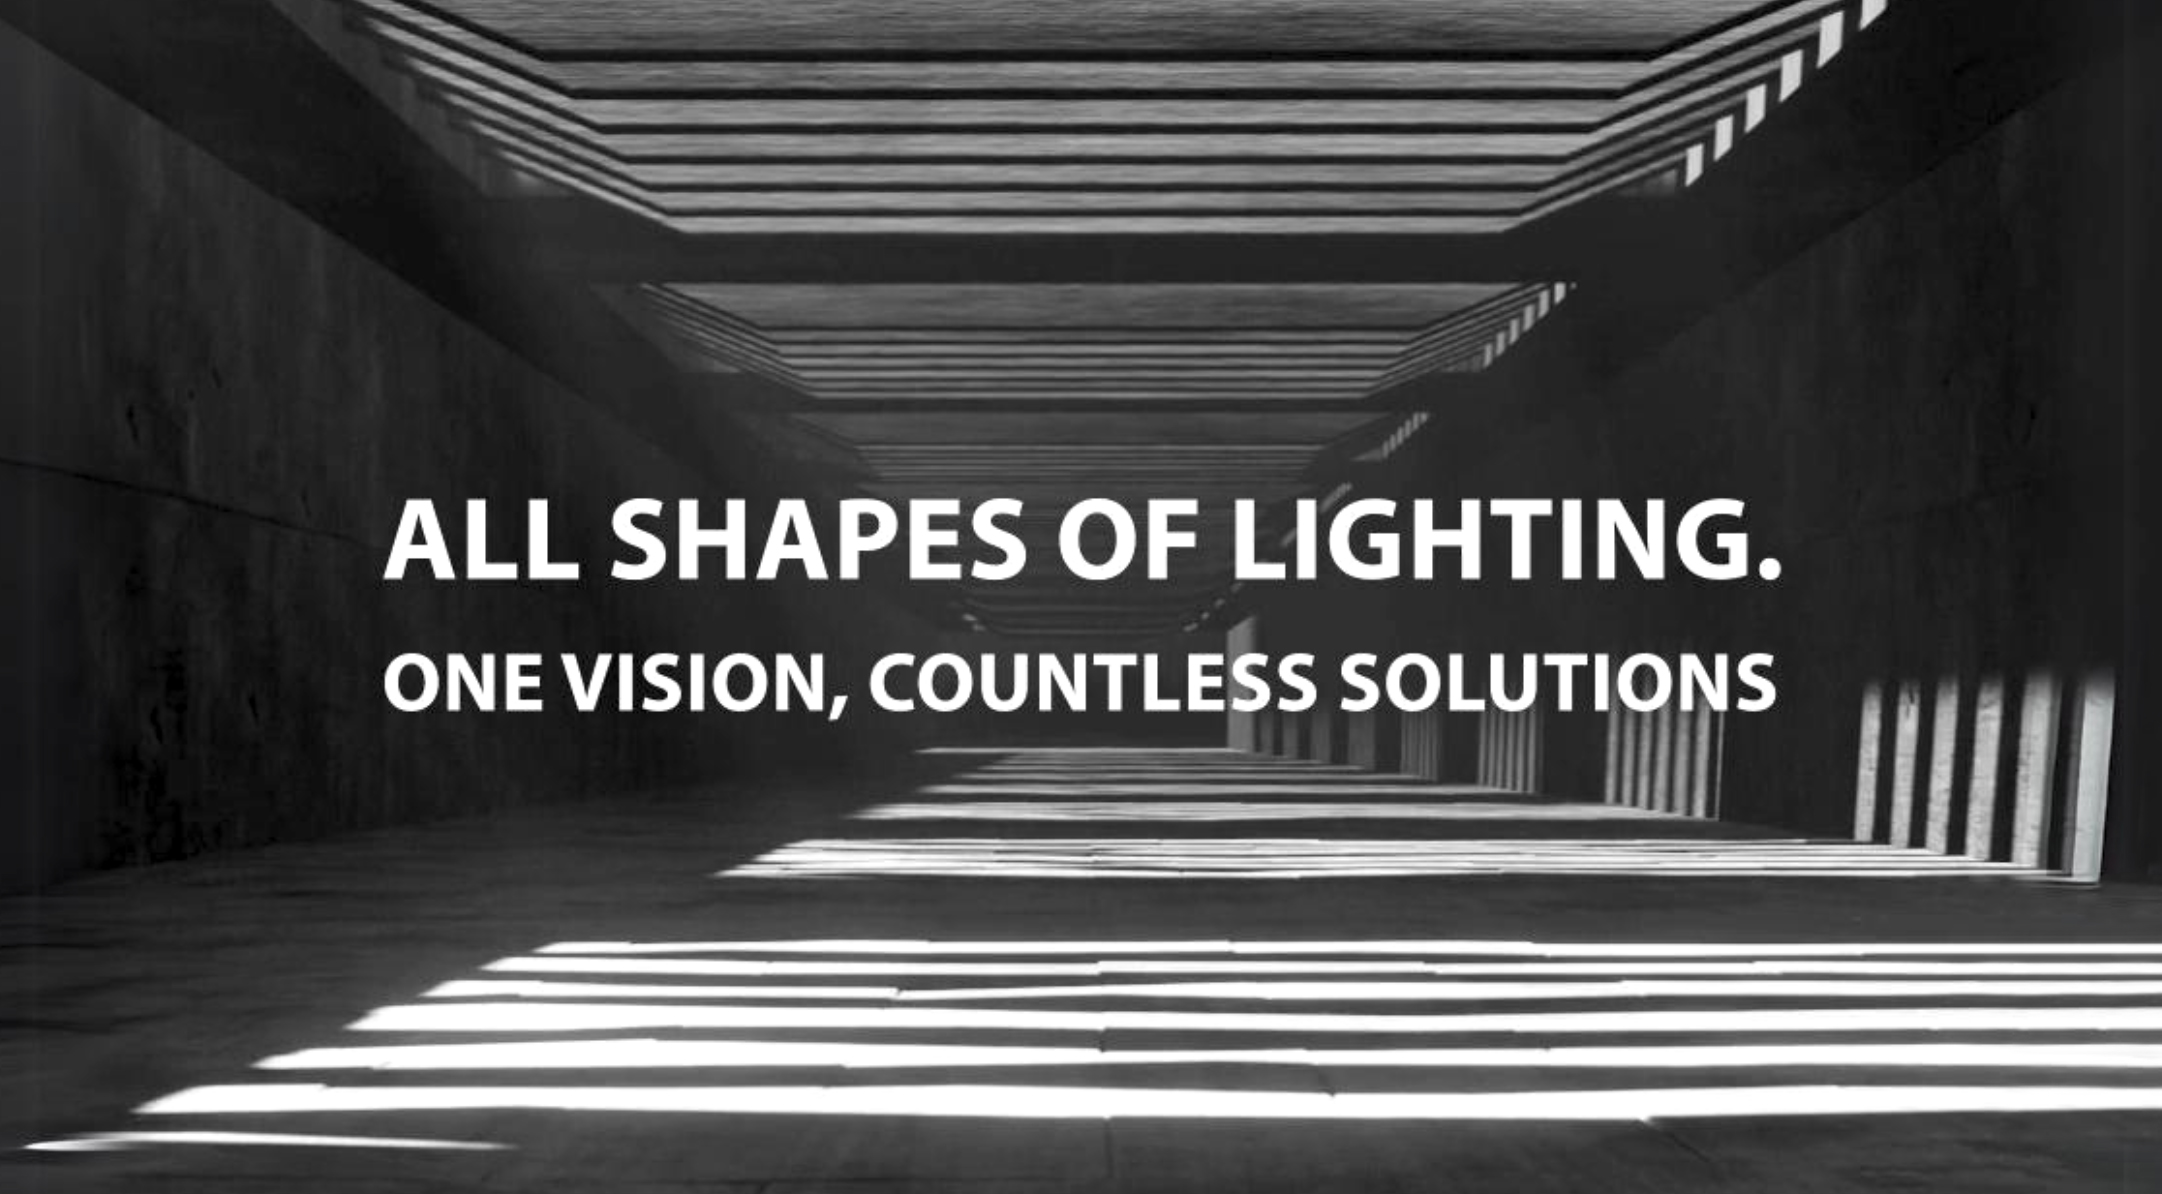 A UNIQUE VISION OF LIGHT, IN ALL ITS FORMS